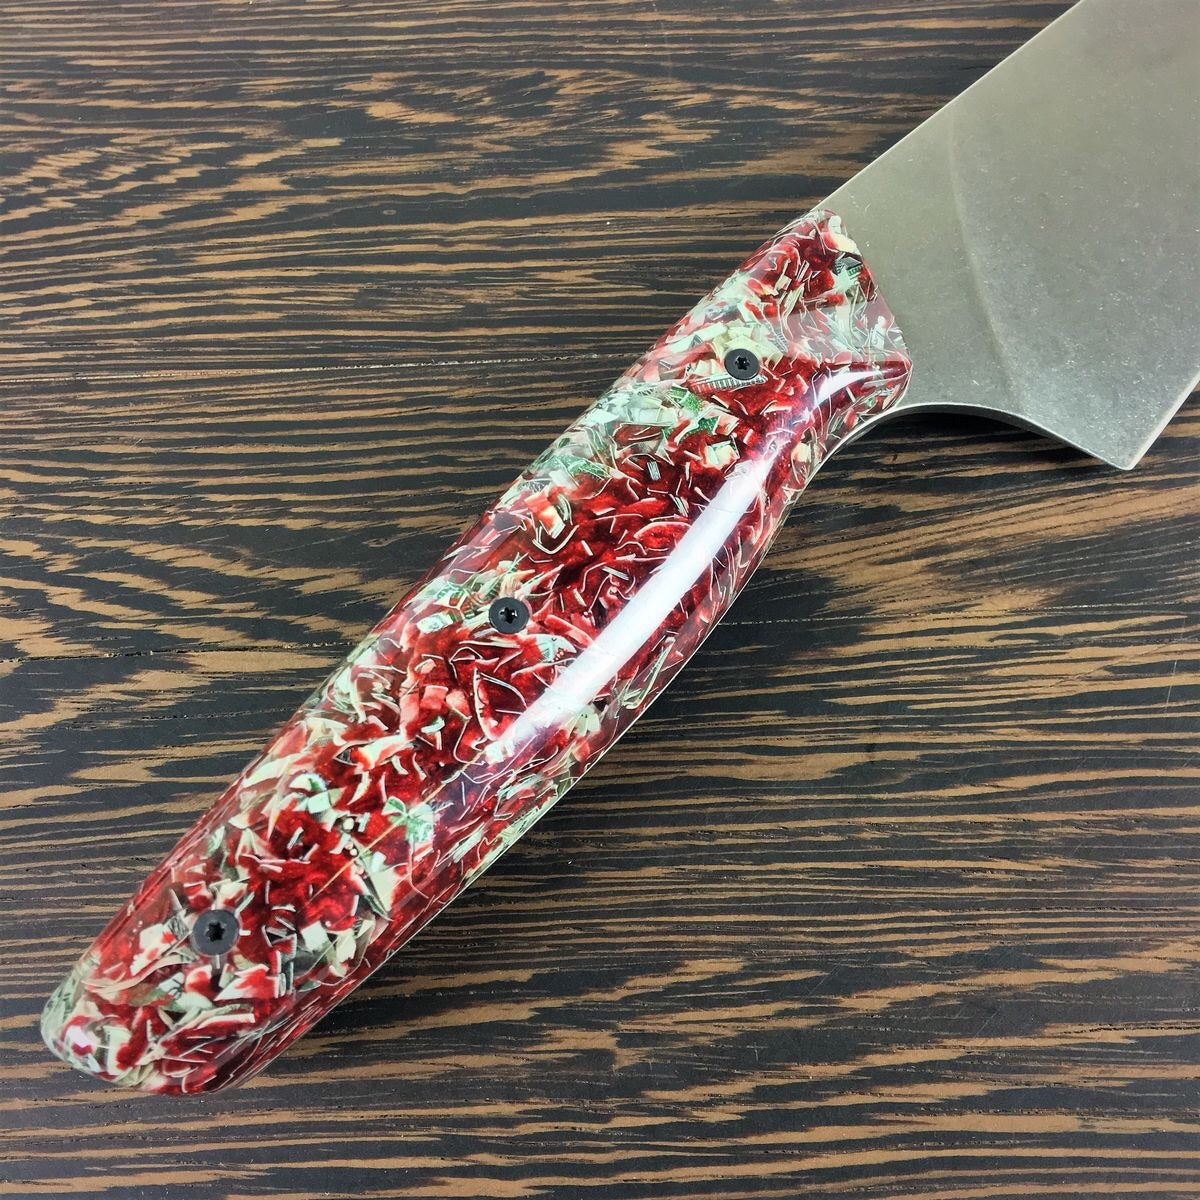 Blood Money - 8” Gyuto Chef Knife S35VN Stainless Steel